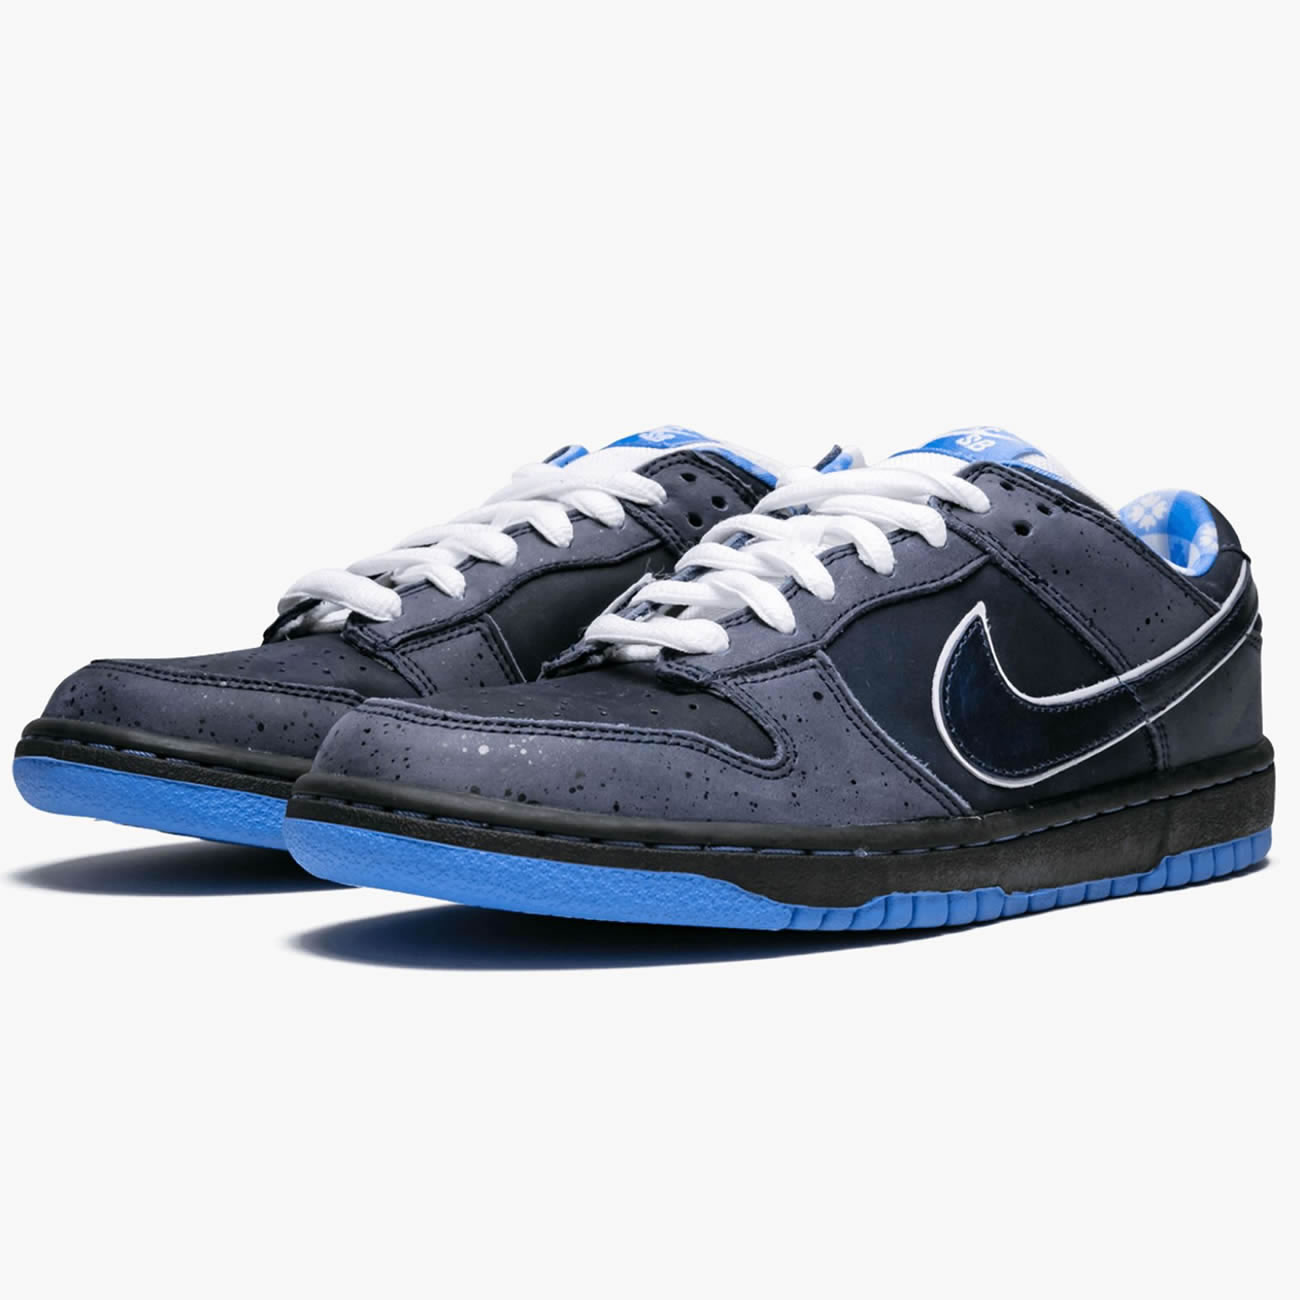 Nike Sb Dunk Low Concepts Bluelobster 313170 342 (2) - newkick.org